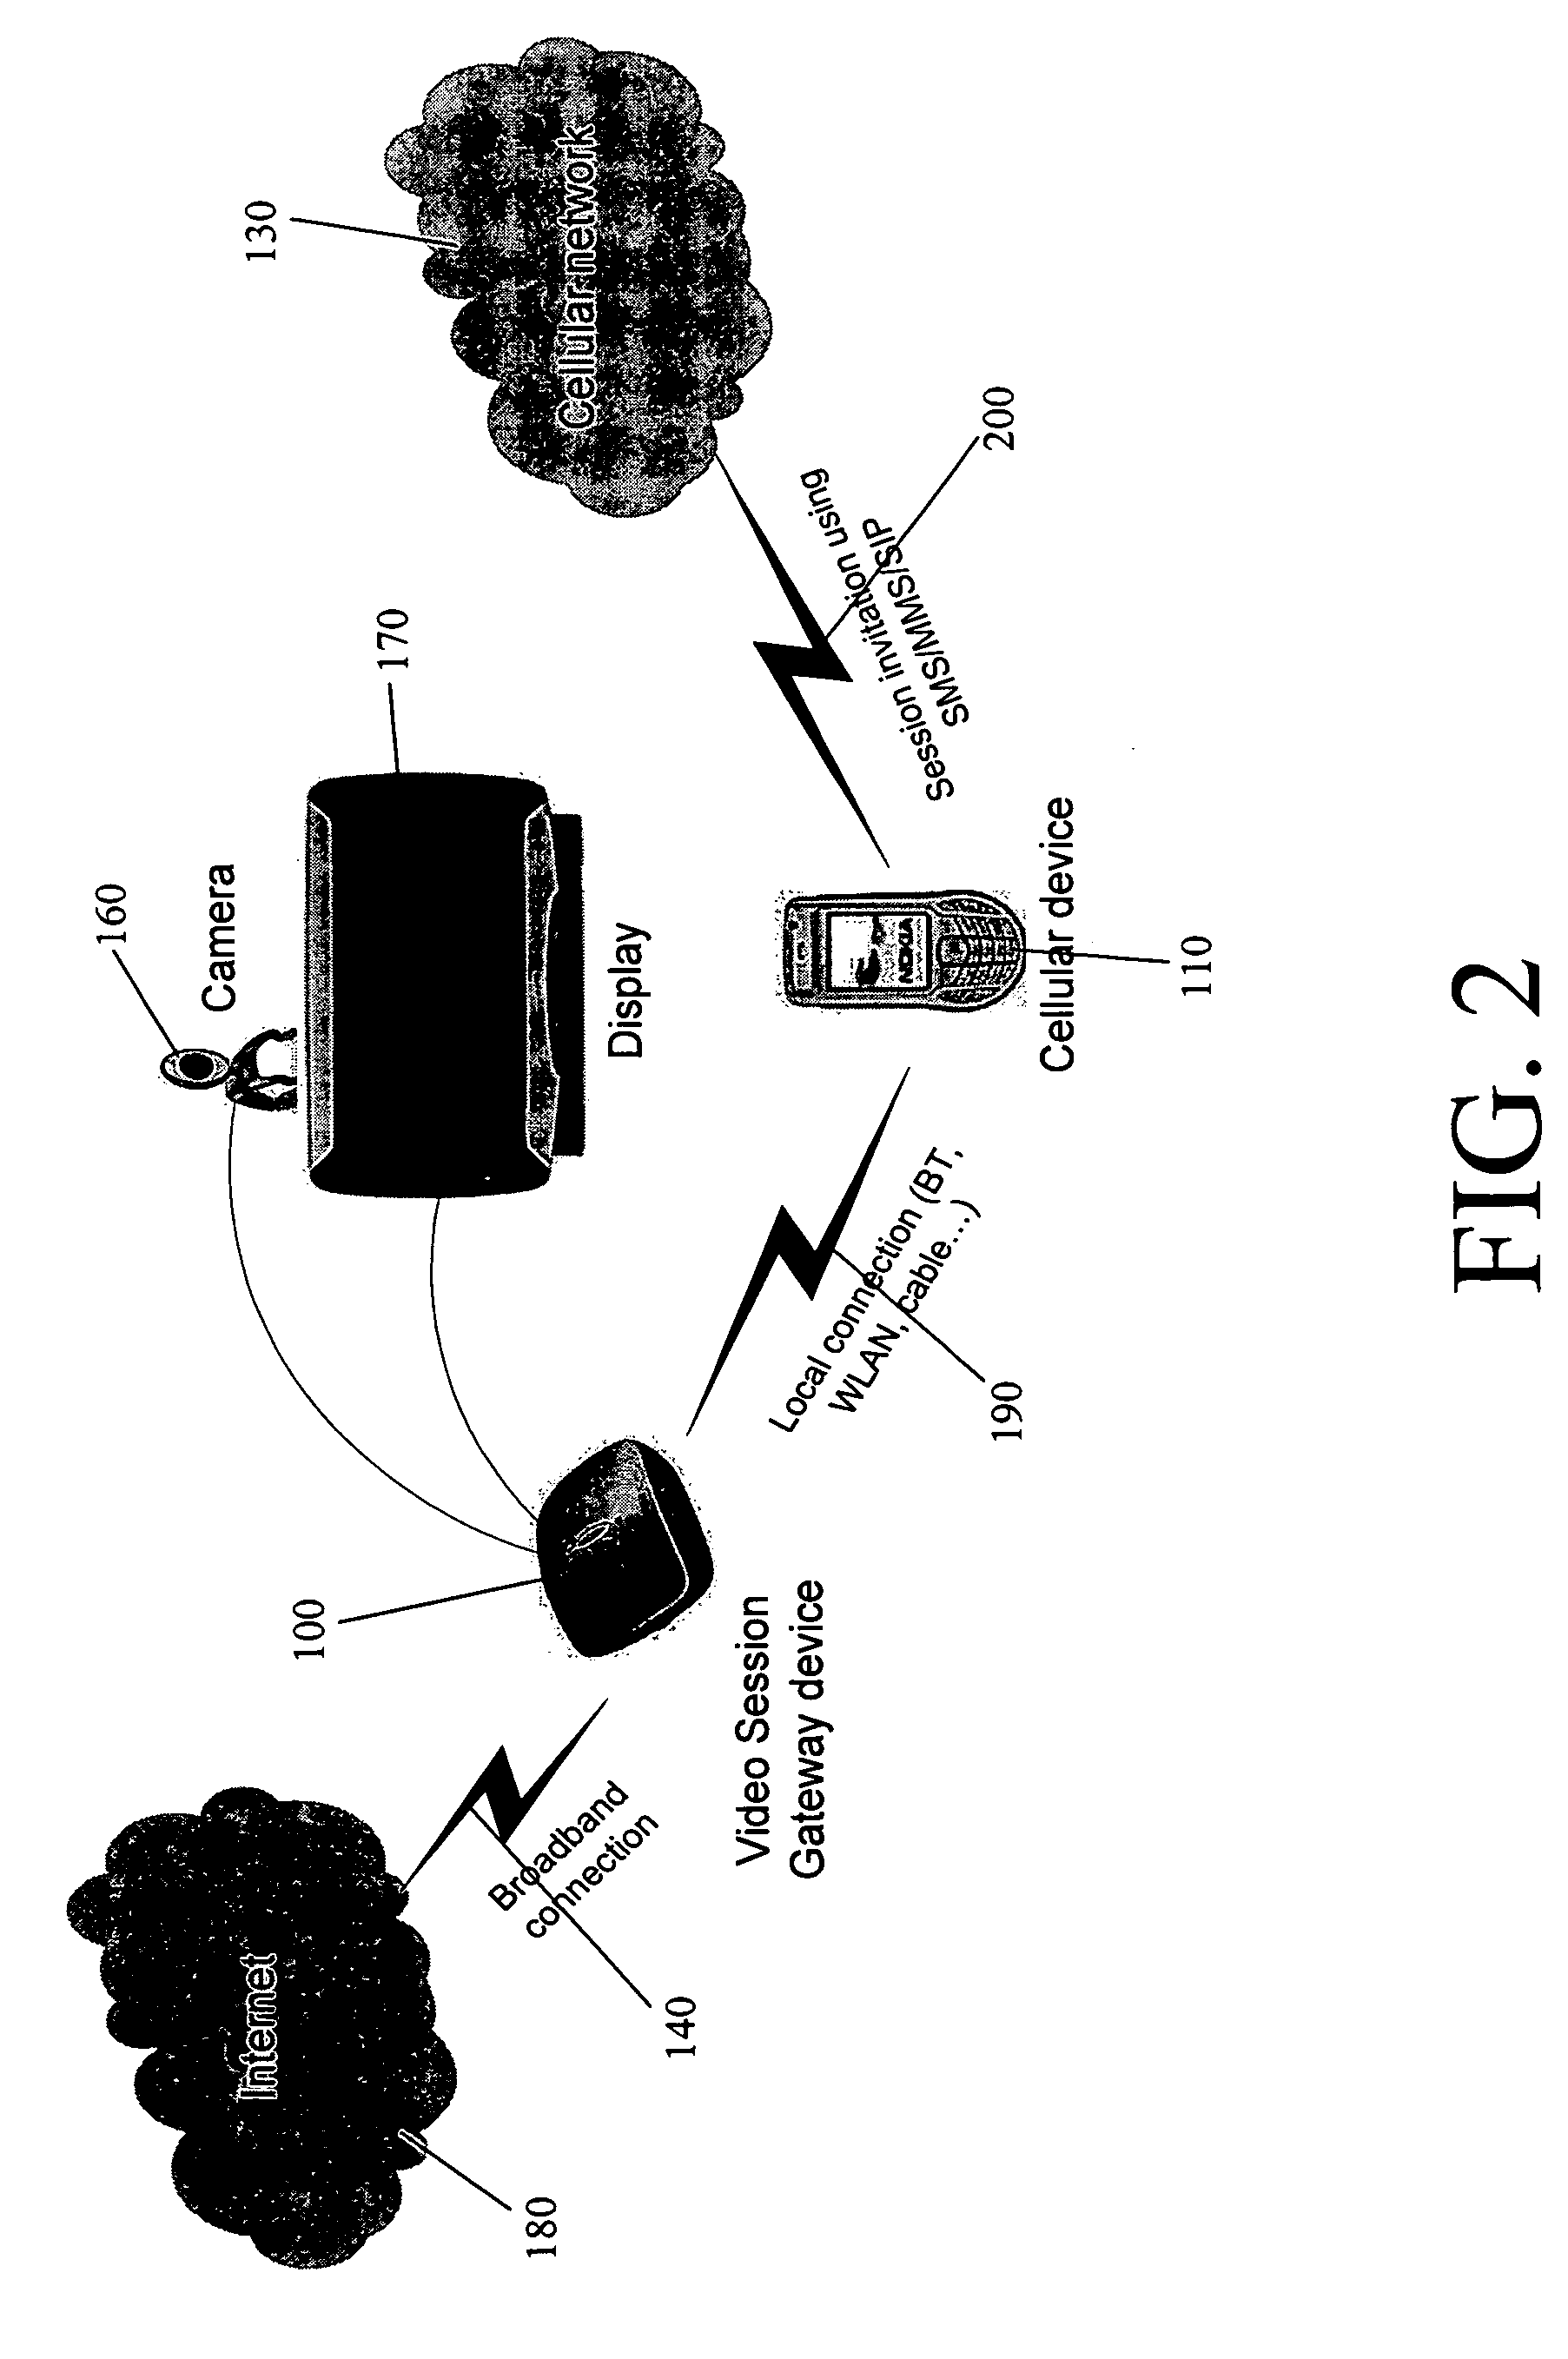 System and method for providing mobile assisted, fixed line video calls